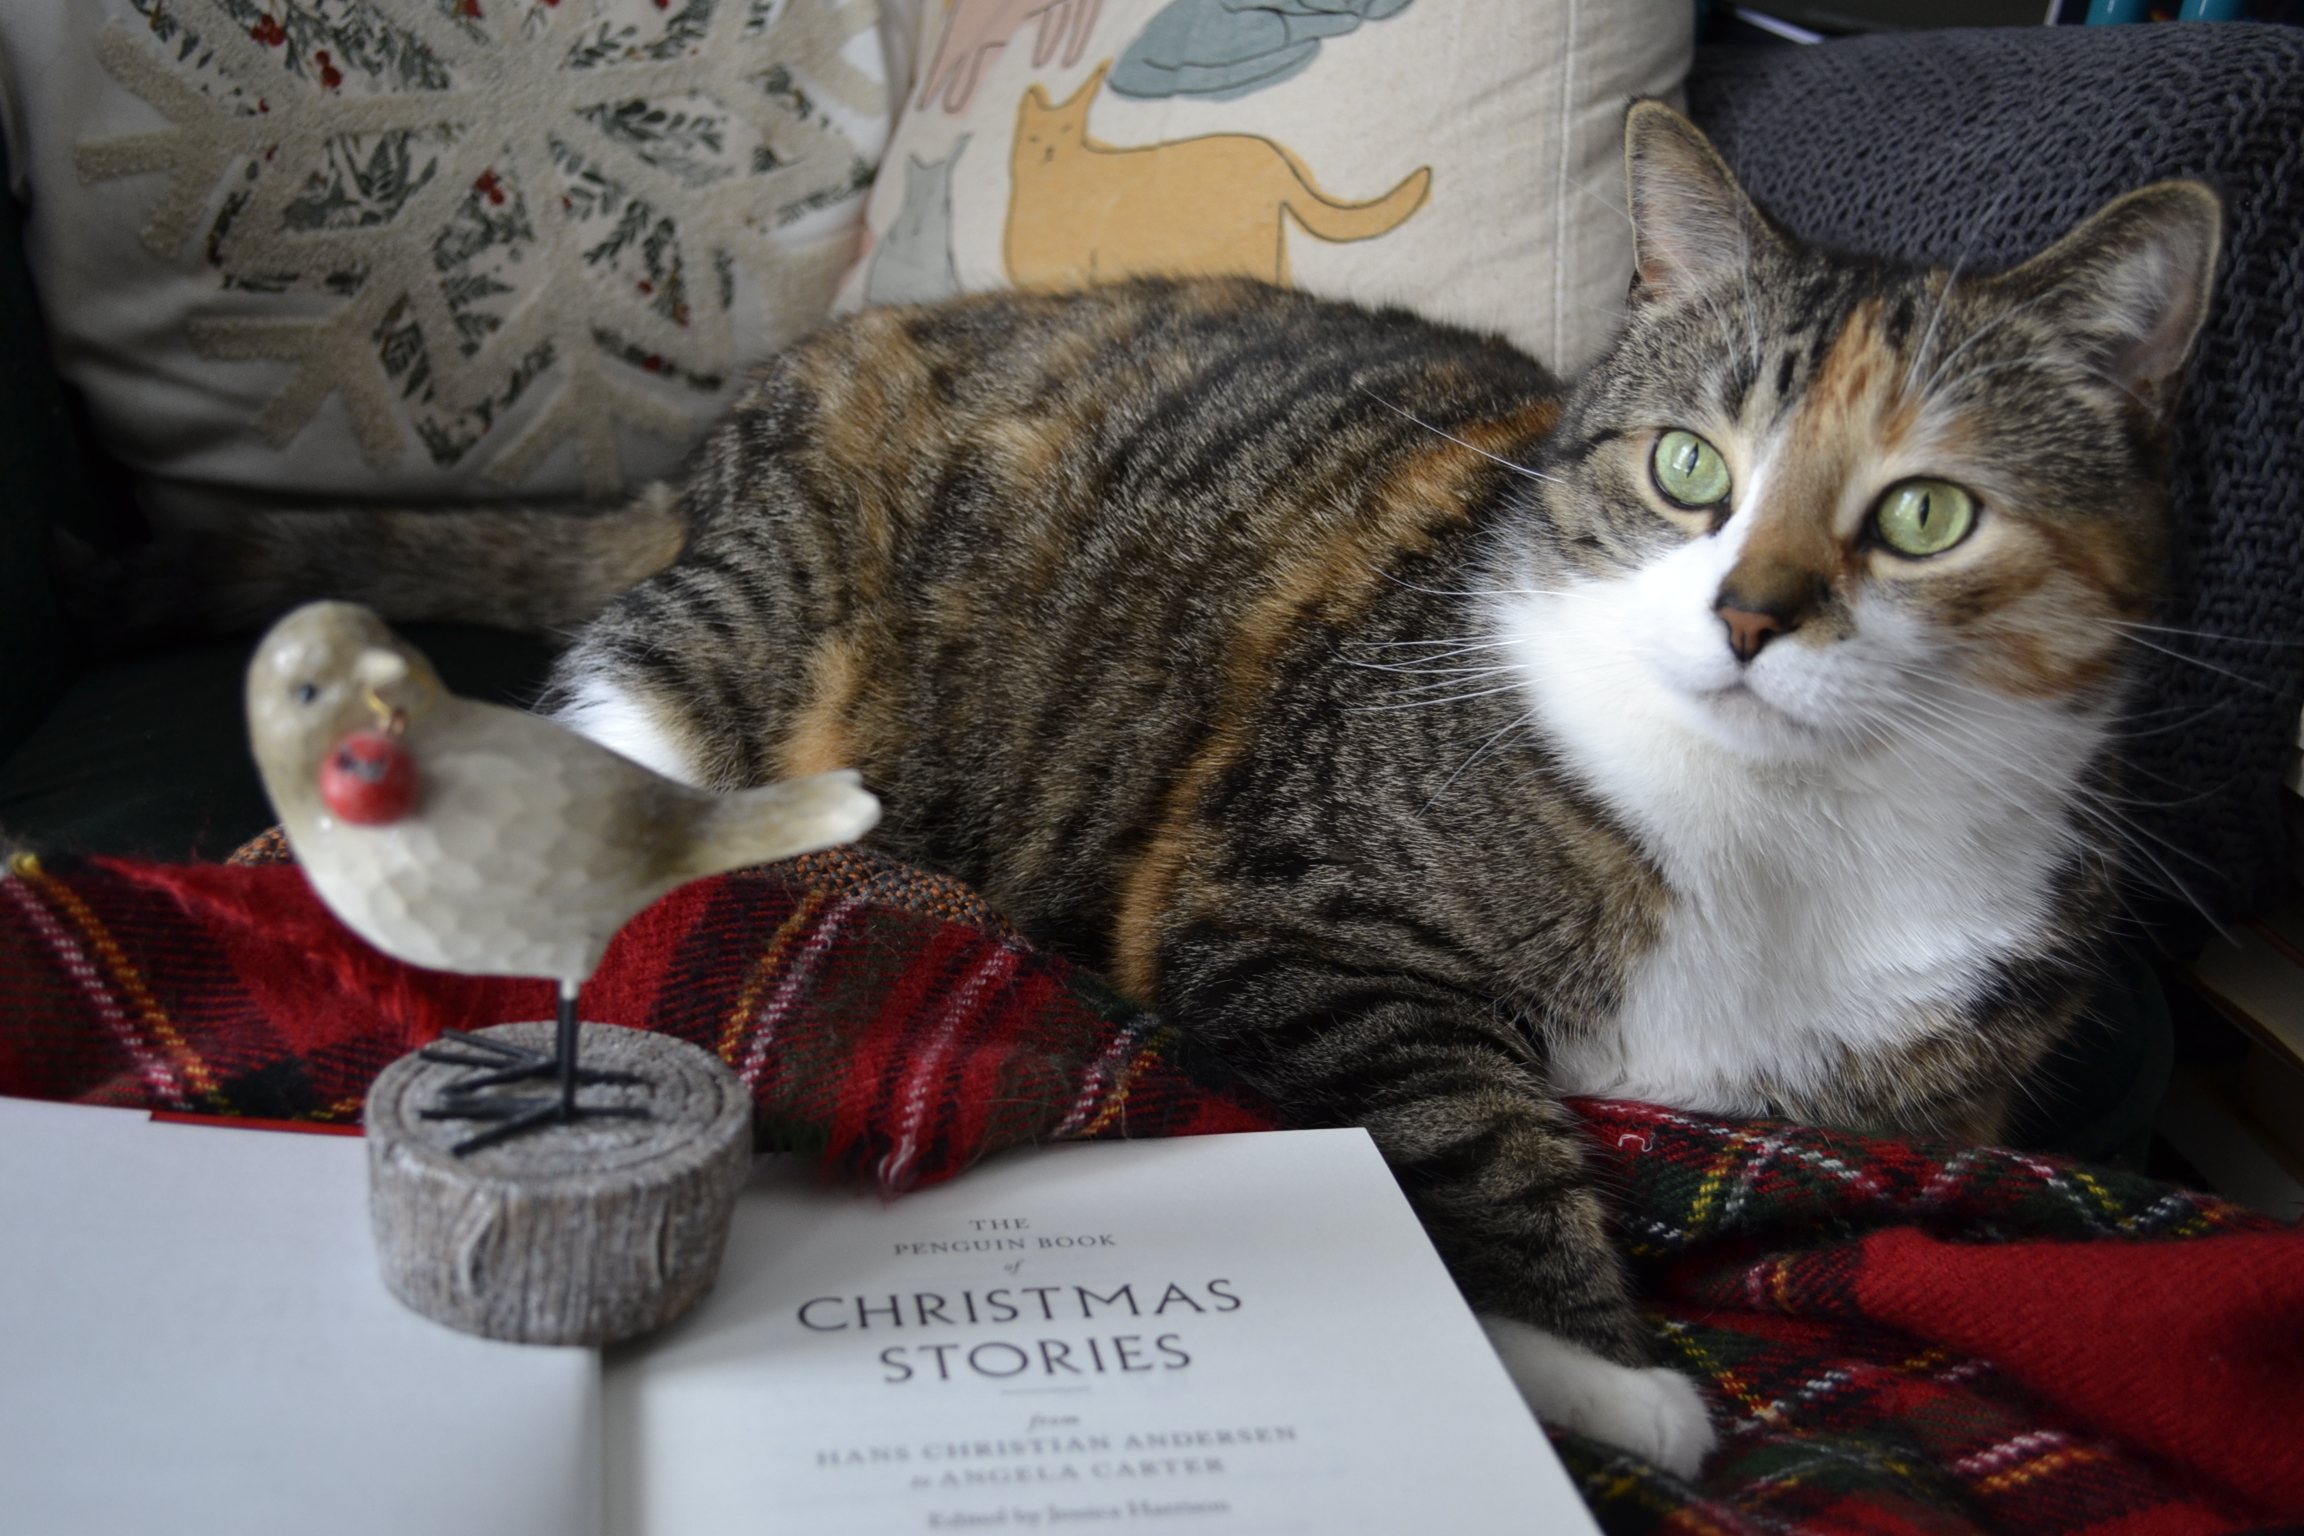 A calico tabby and a bird statue sit on pages that read The Penguin Book of Christmas Stories.